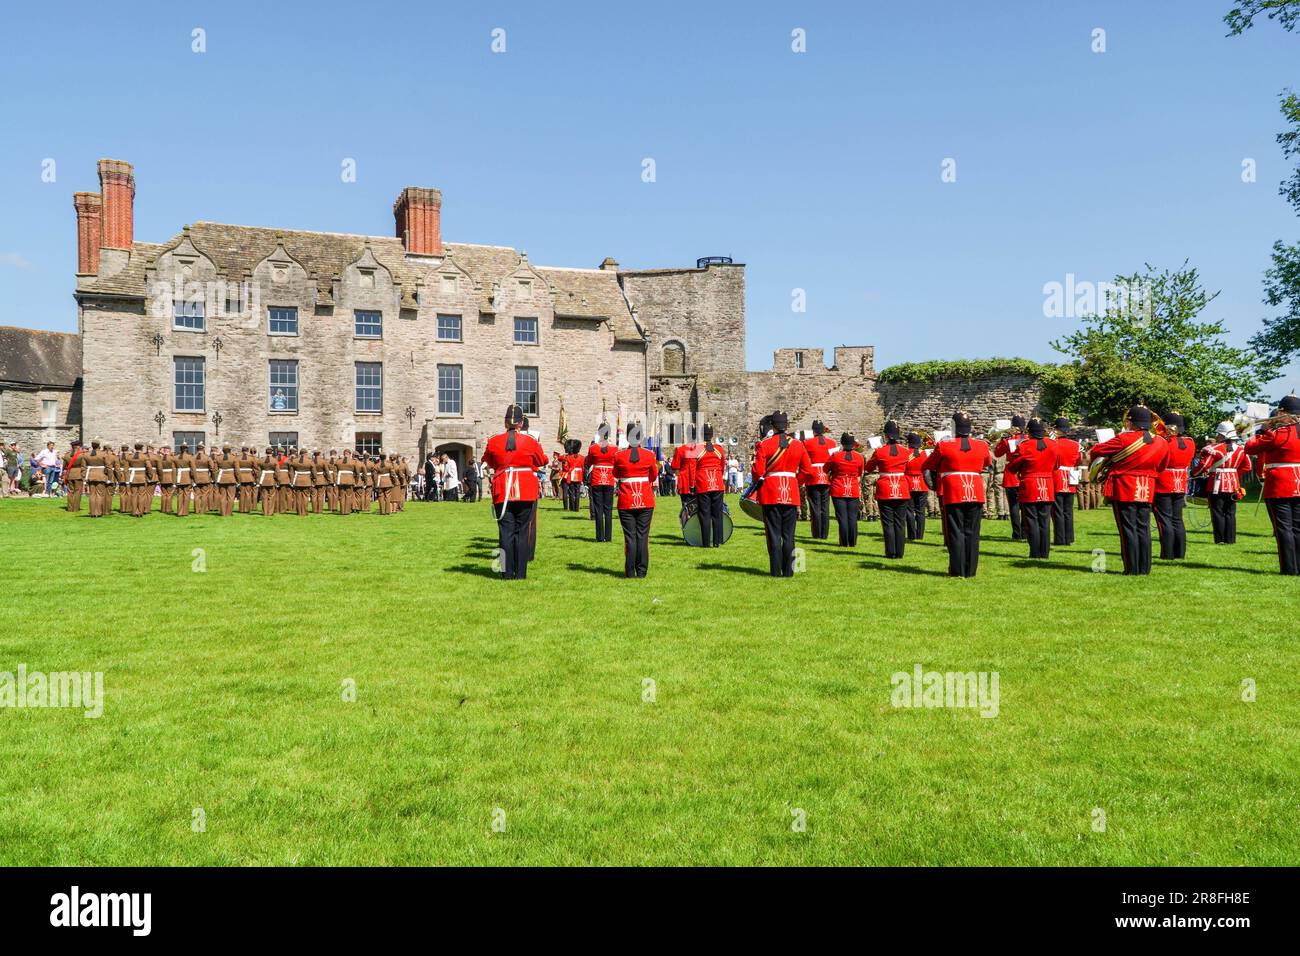 Royal Welsh Military Band, veterans and cadets celebrate the reaffirmation for their Freedom of the County in the grounds of Hay Castle Powys Wales UK. Stock Photo